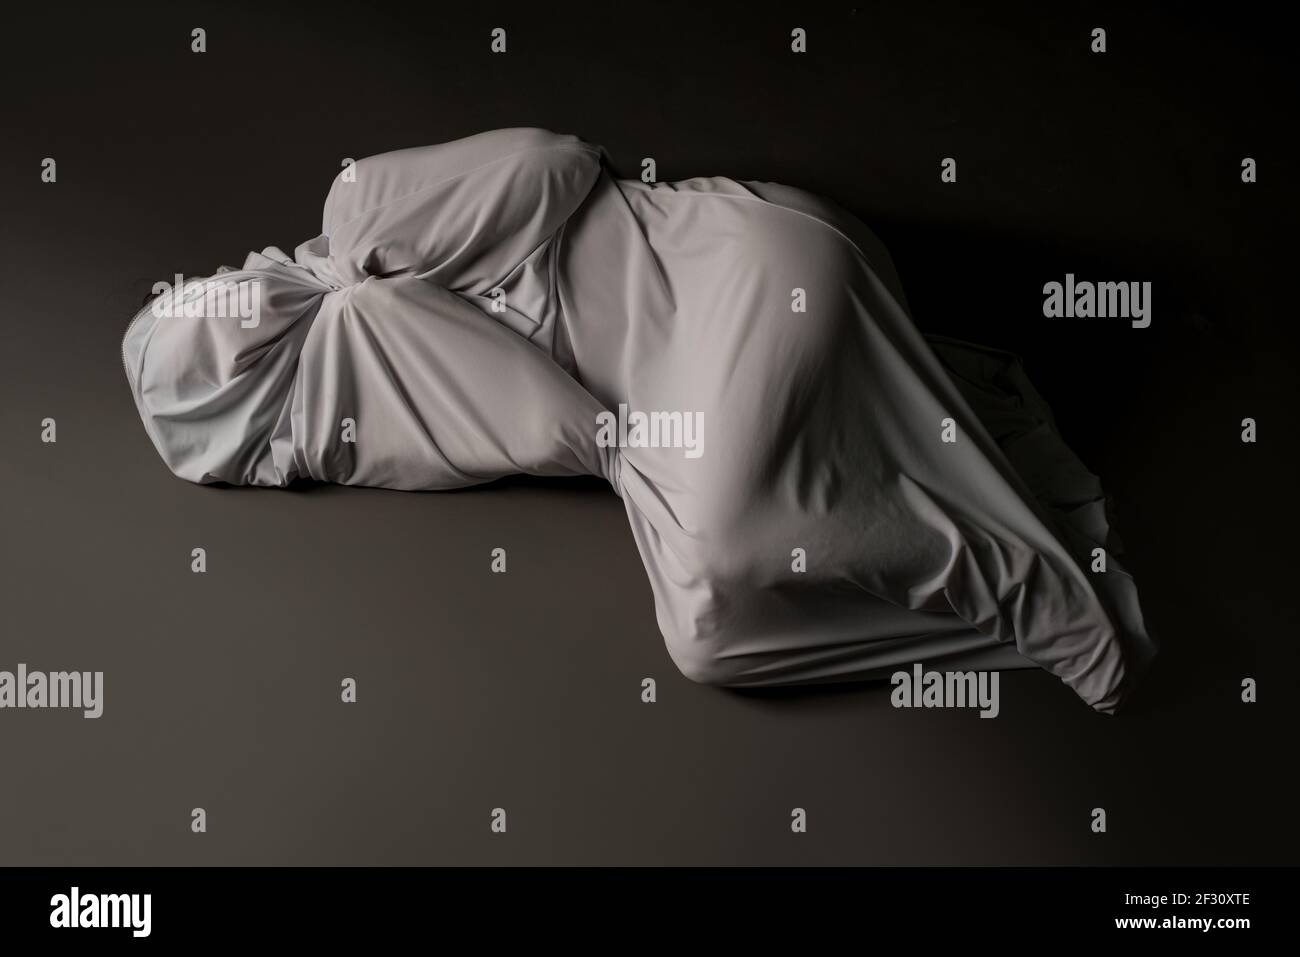 Anonymous person wrapped in cloth lying on floor Stock Photo